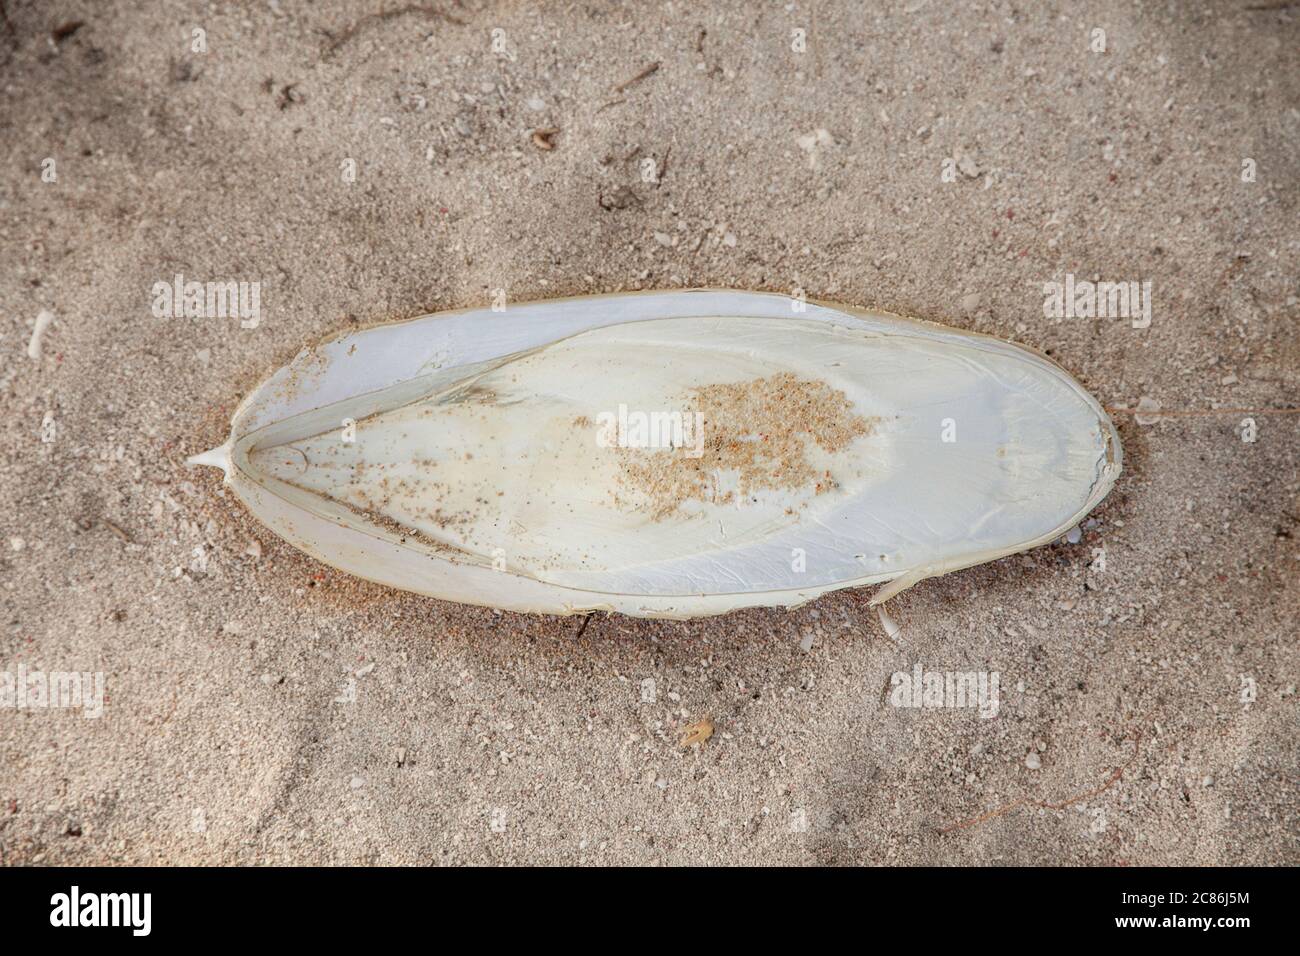 This cuttlebone washed up on a beach in Indonesia. It is the internal shell of the cephalopod and likely from a broadclub cuttlefish, Sepia latimanus. Stock Photo